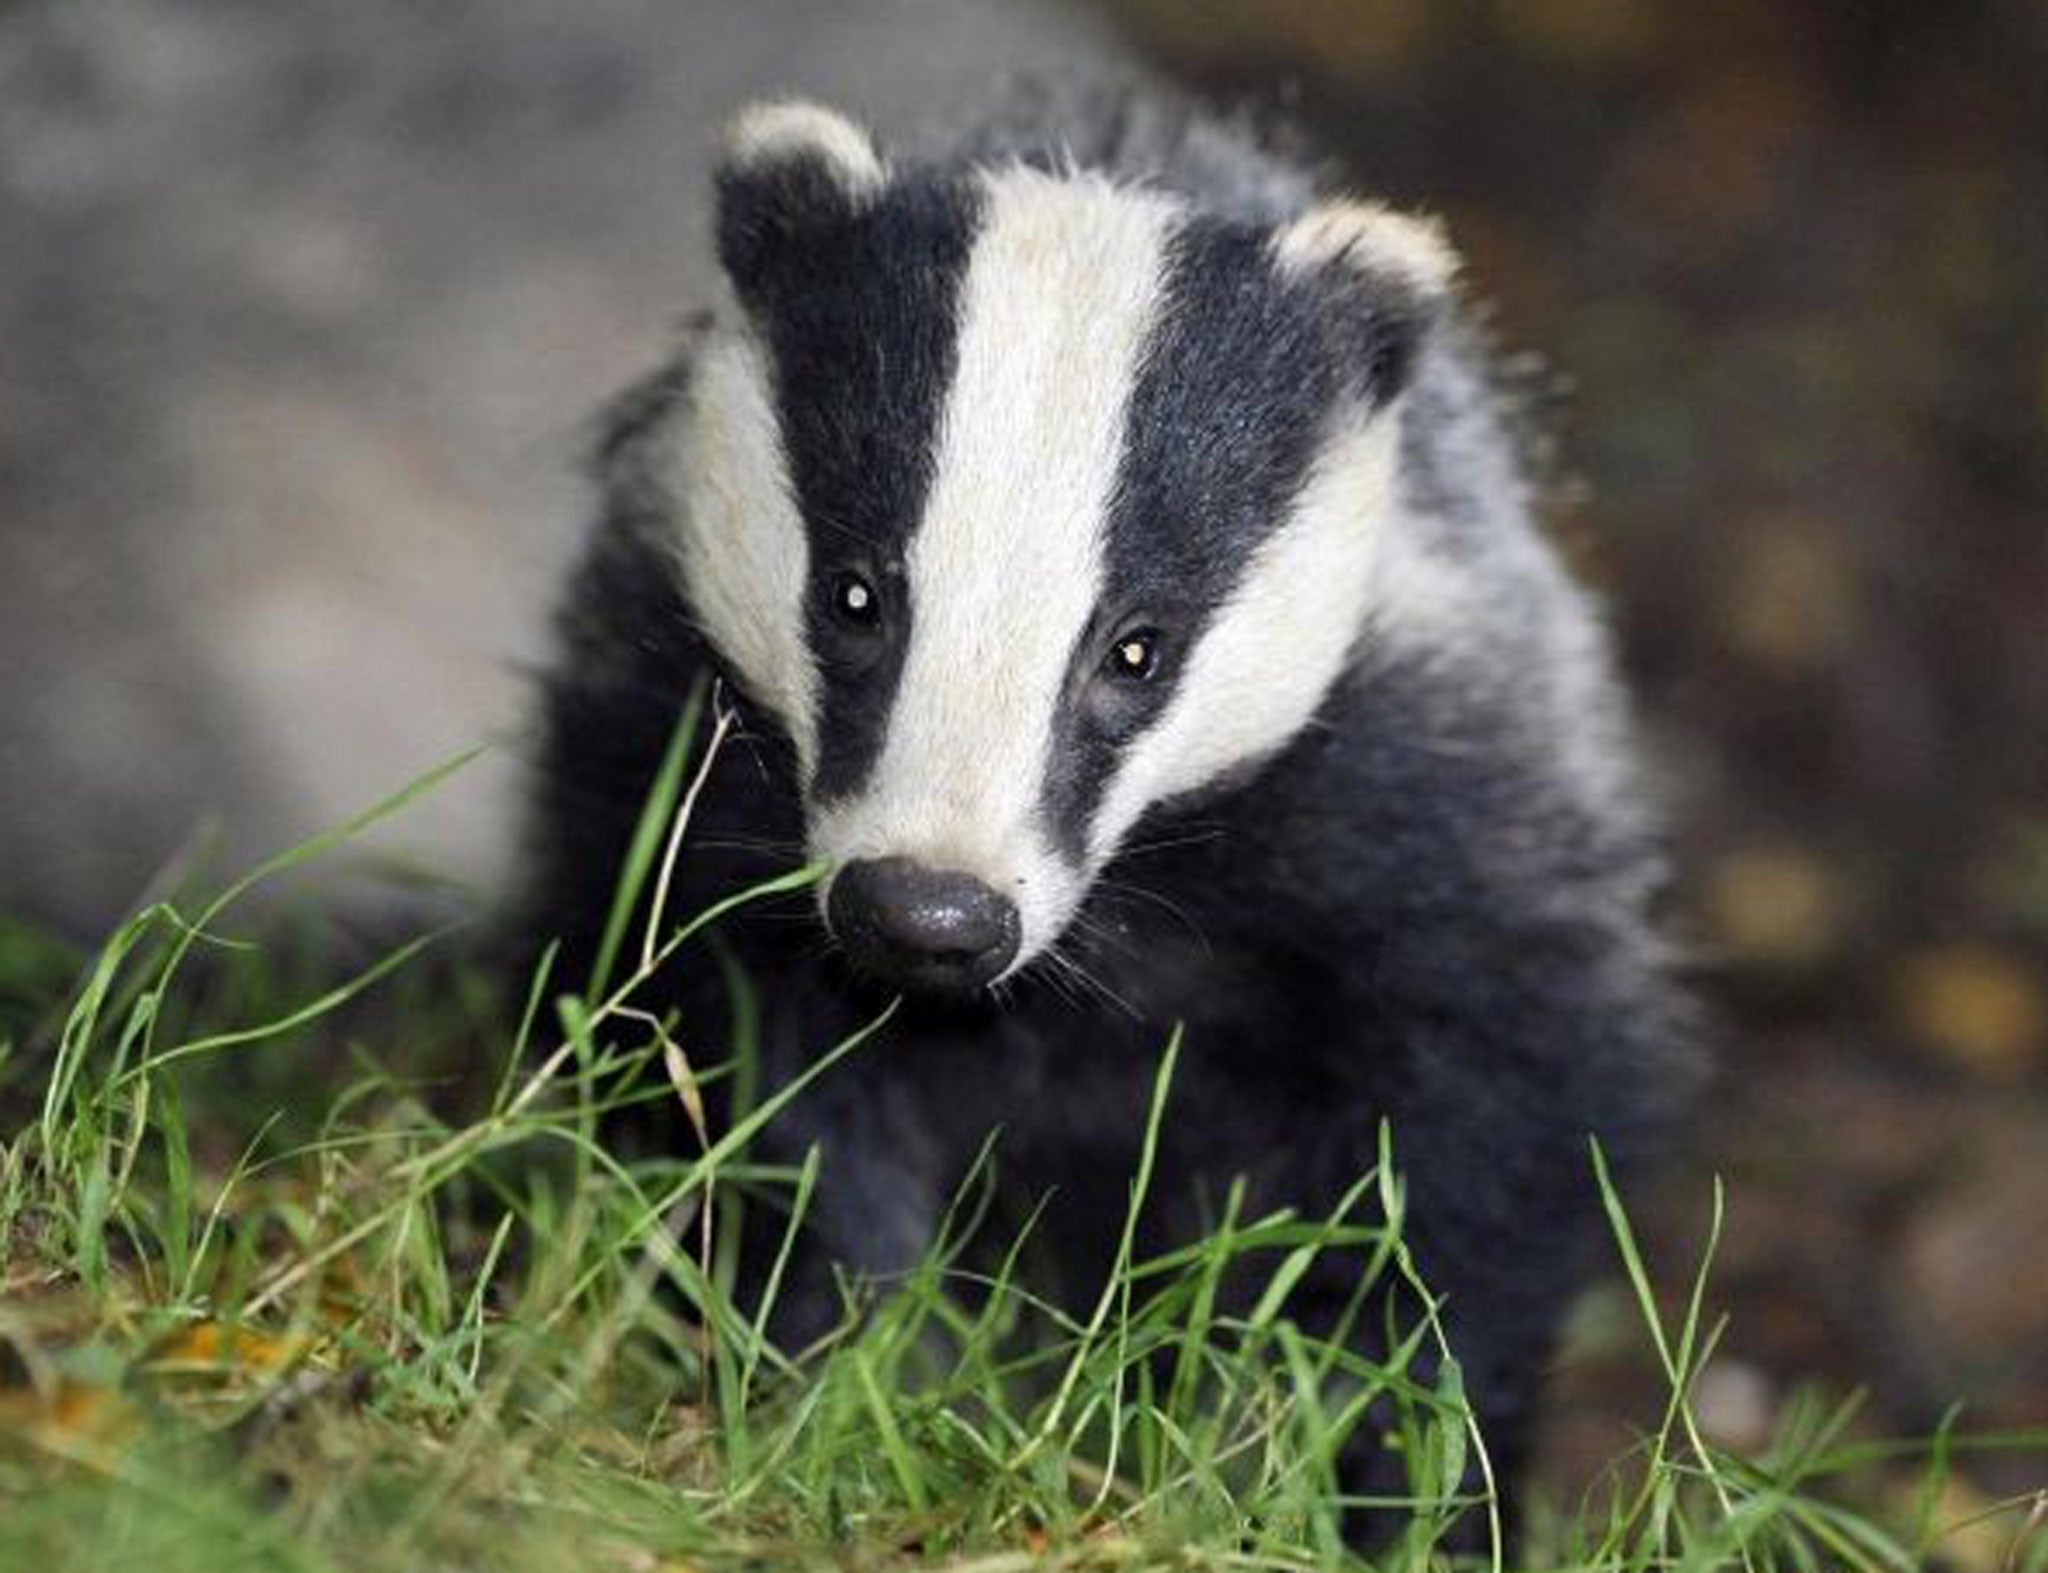 The badger was reportedly very threatening